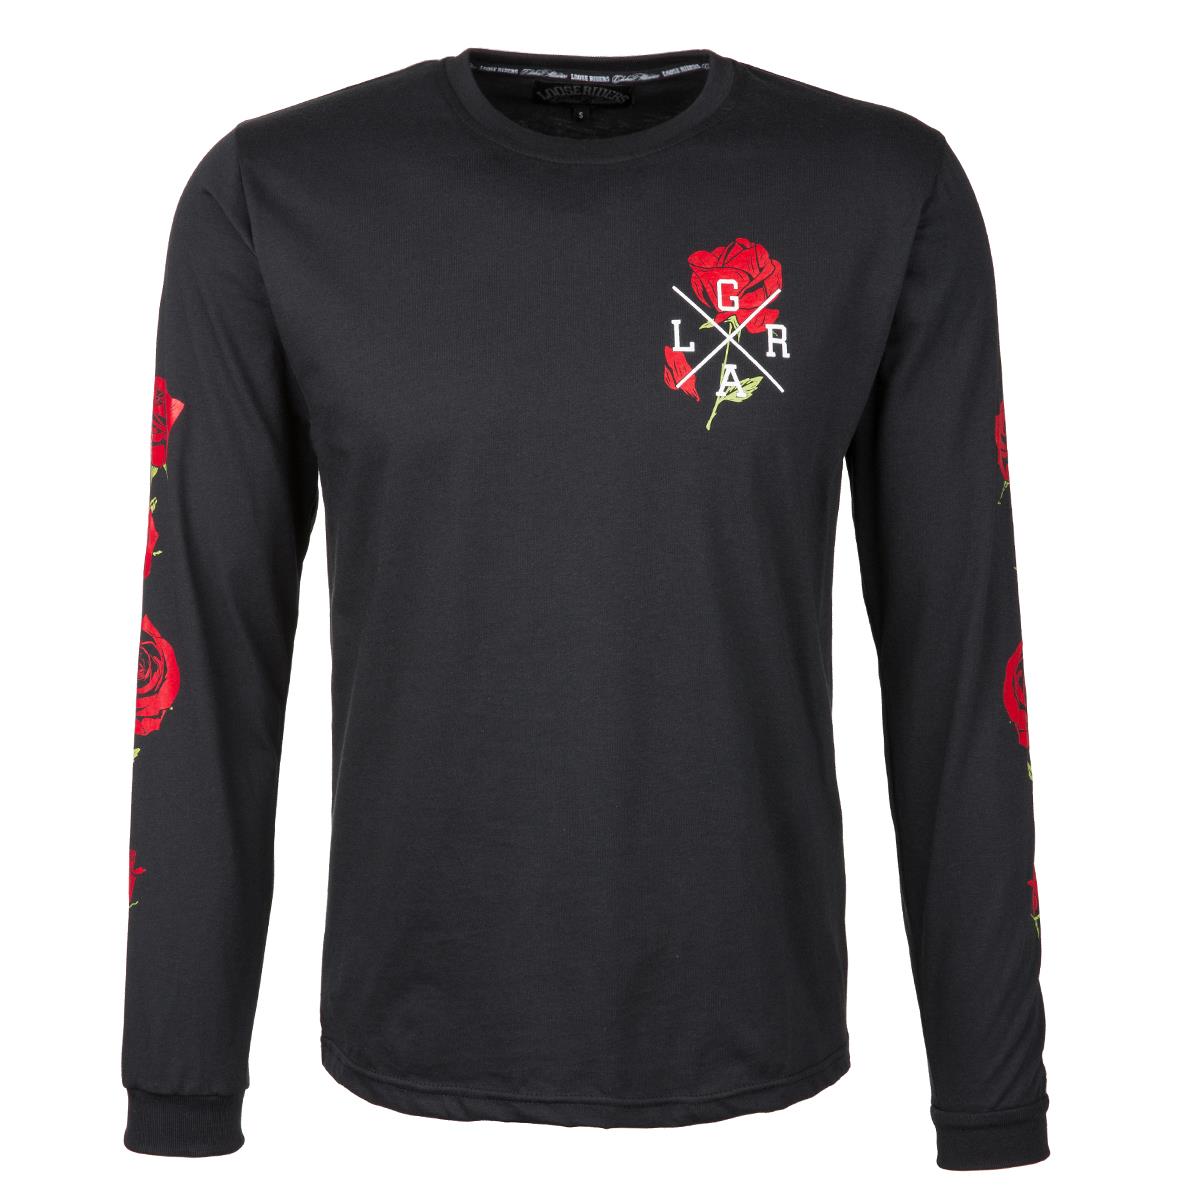 Loose Riders Maglione Roses Black/Red